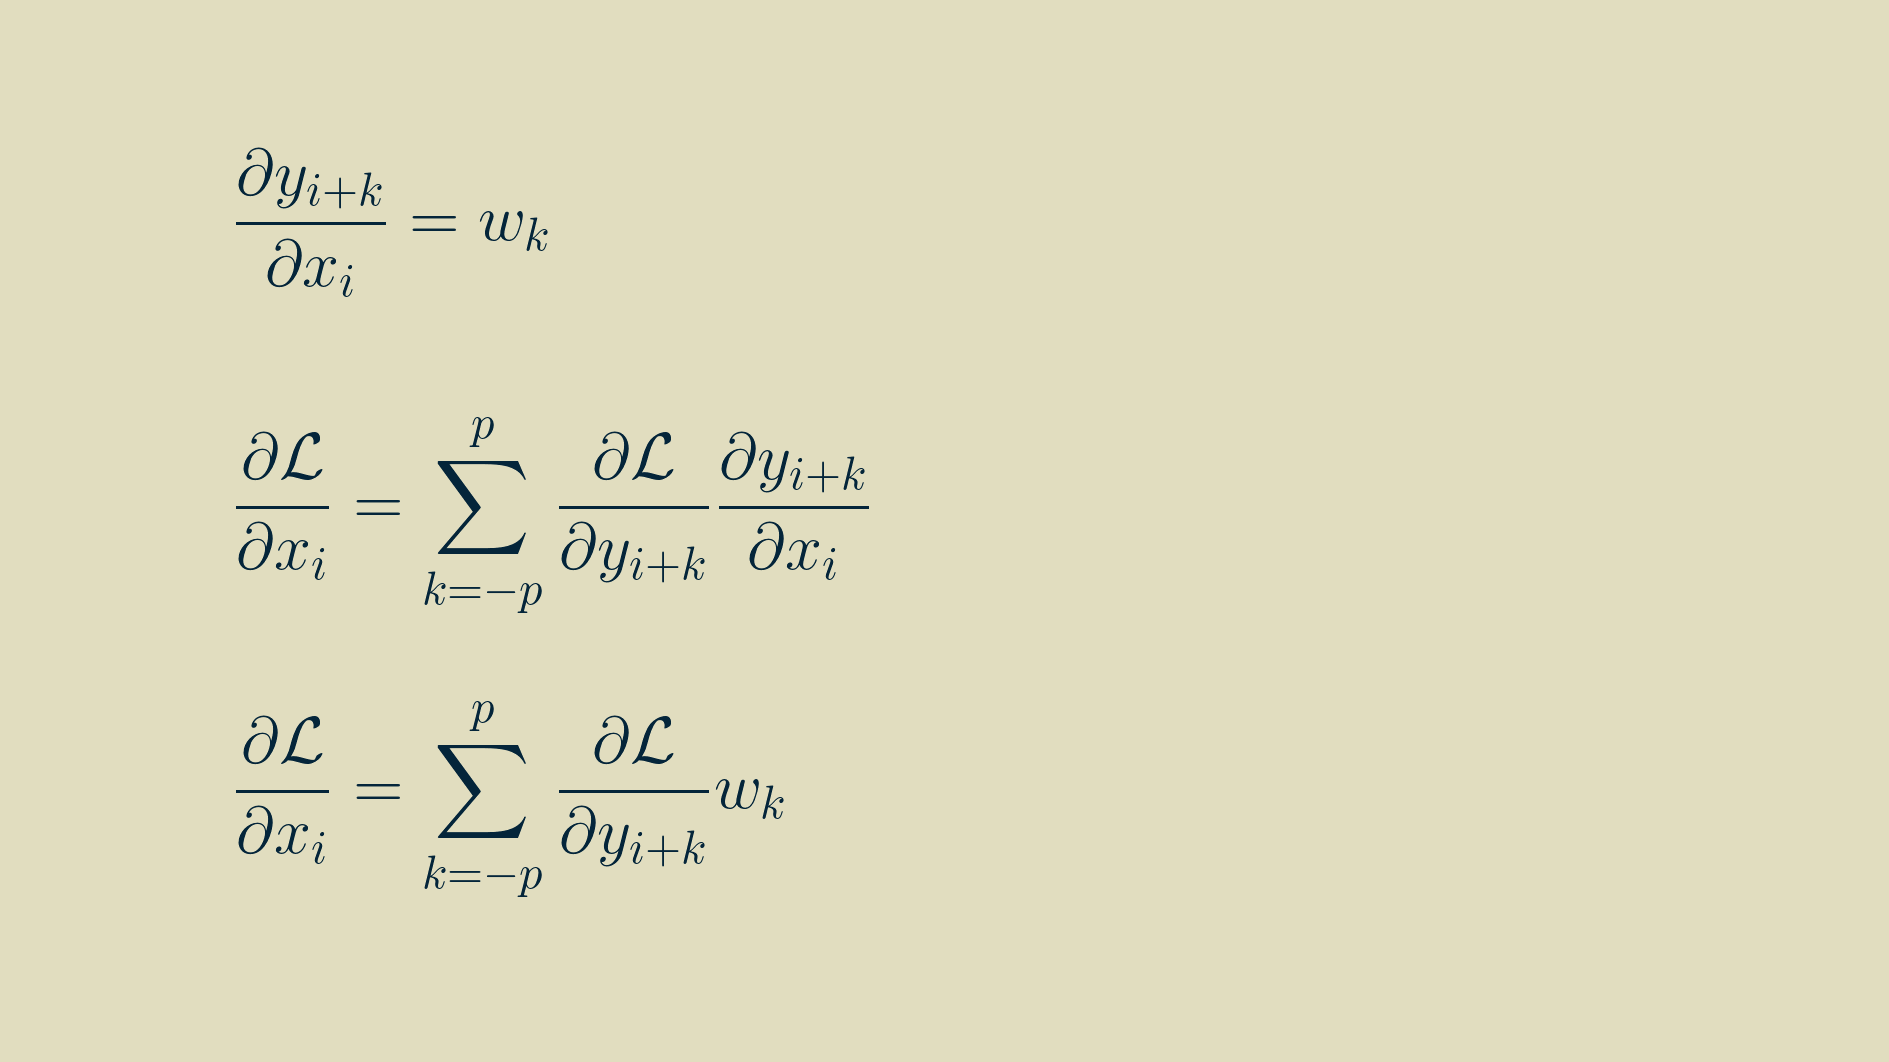 Simplified calulation of the input gradient